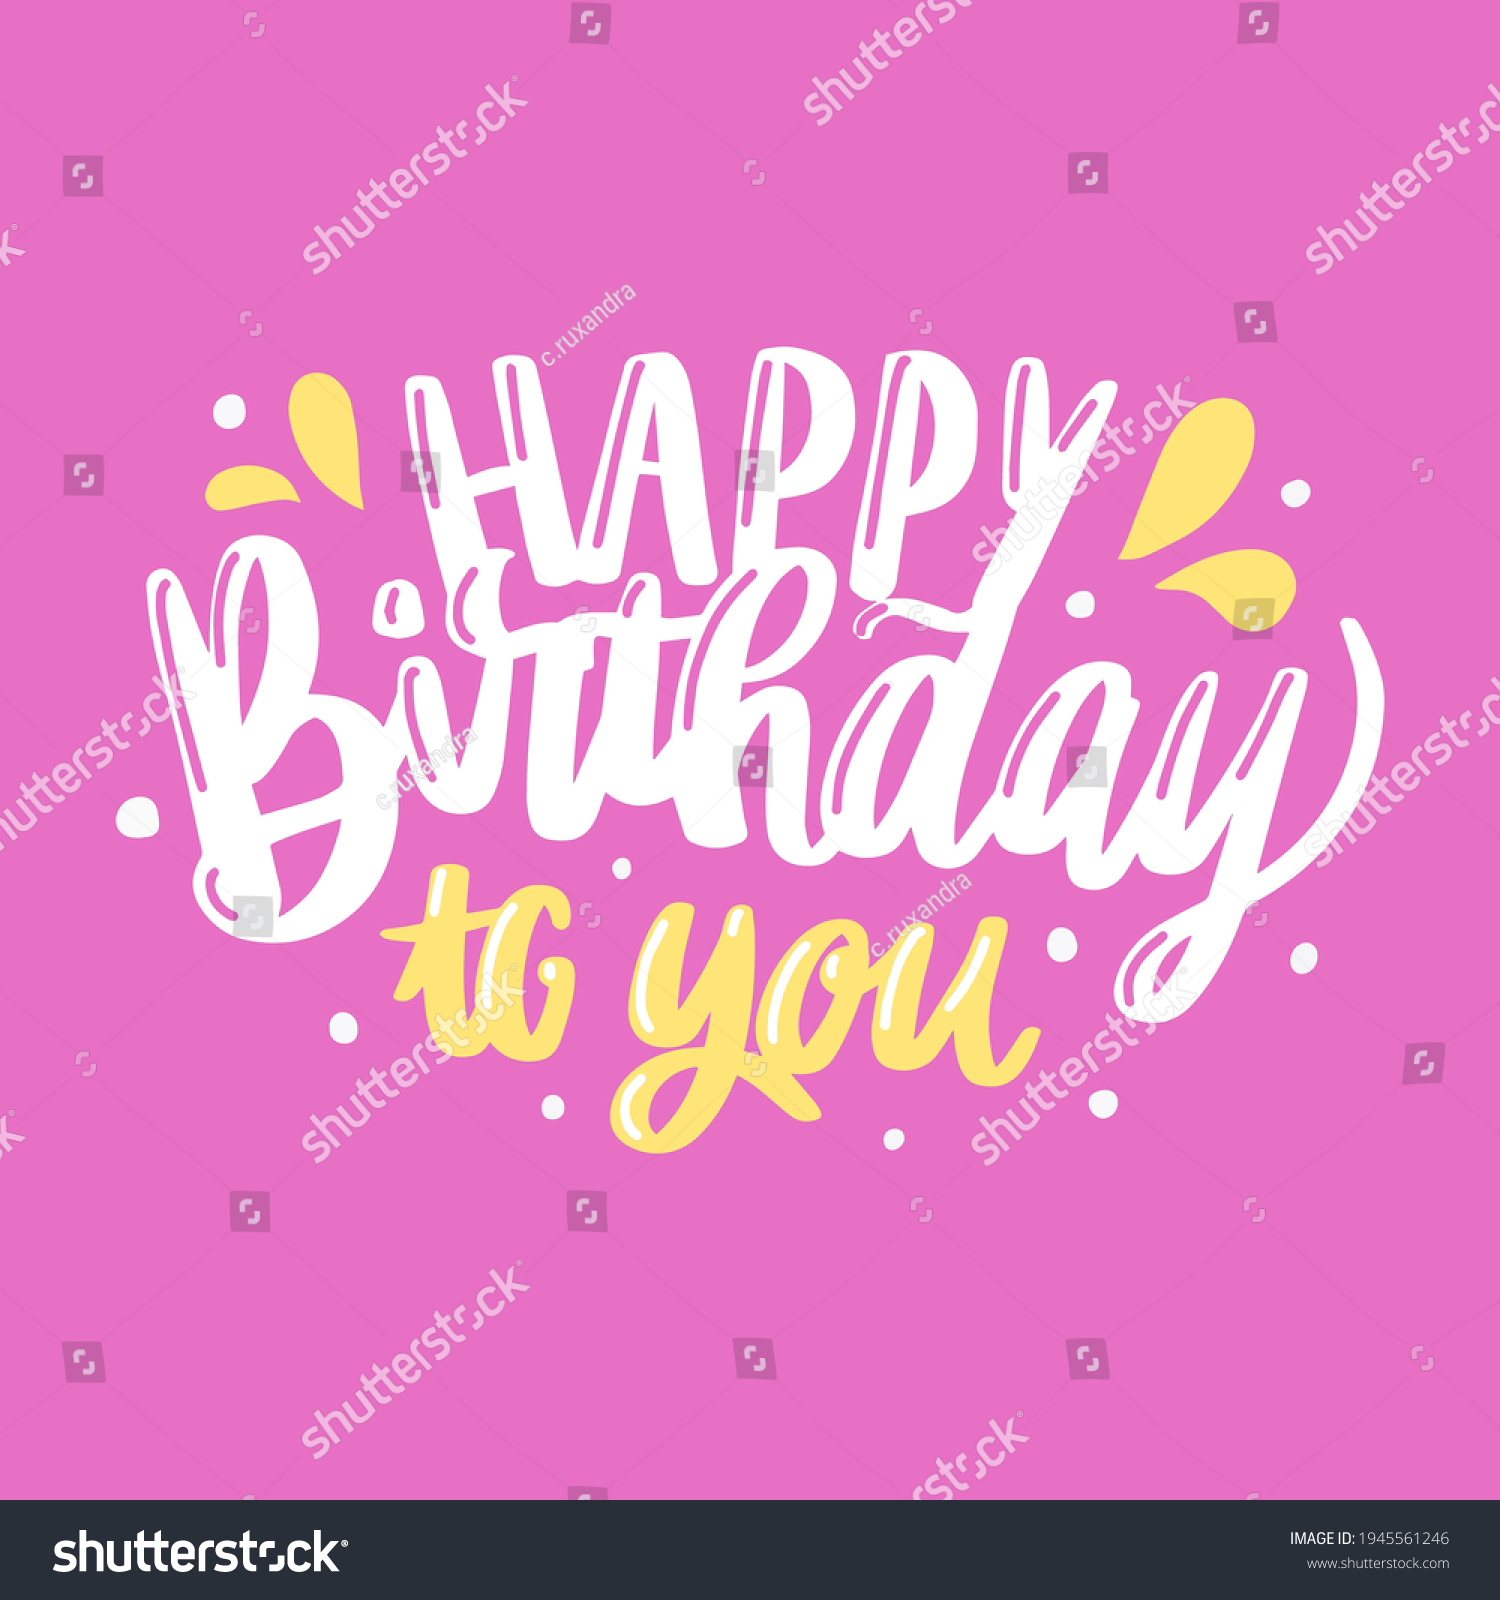 Happy Birthdaybeautiful Greeting Card Scratched Calligraphy Stock ...